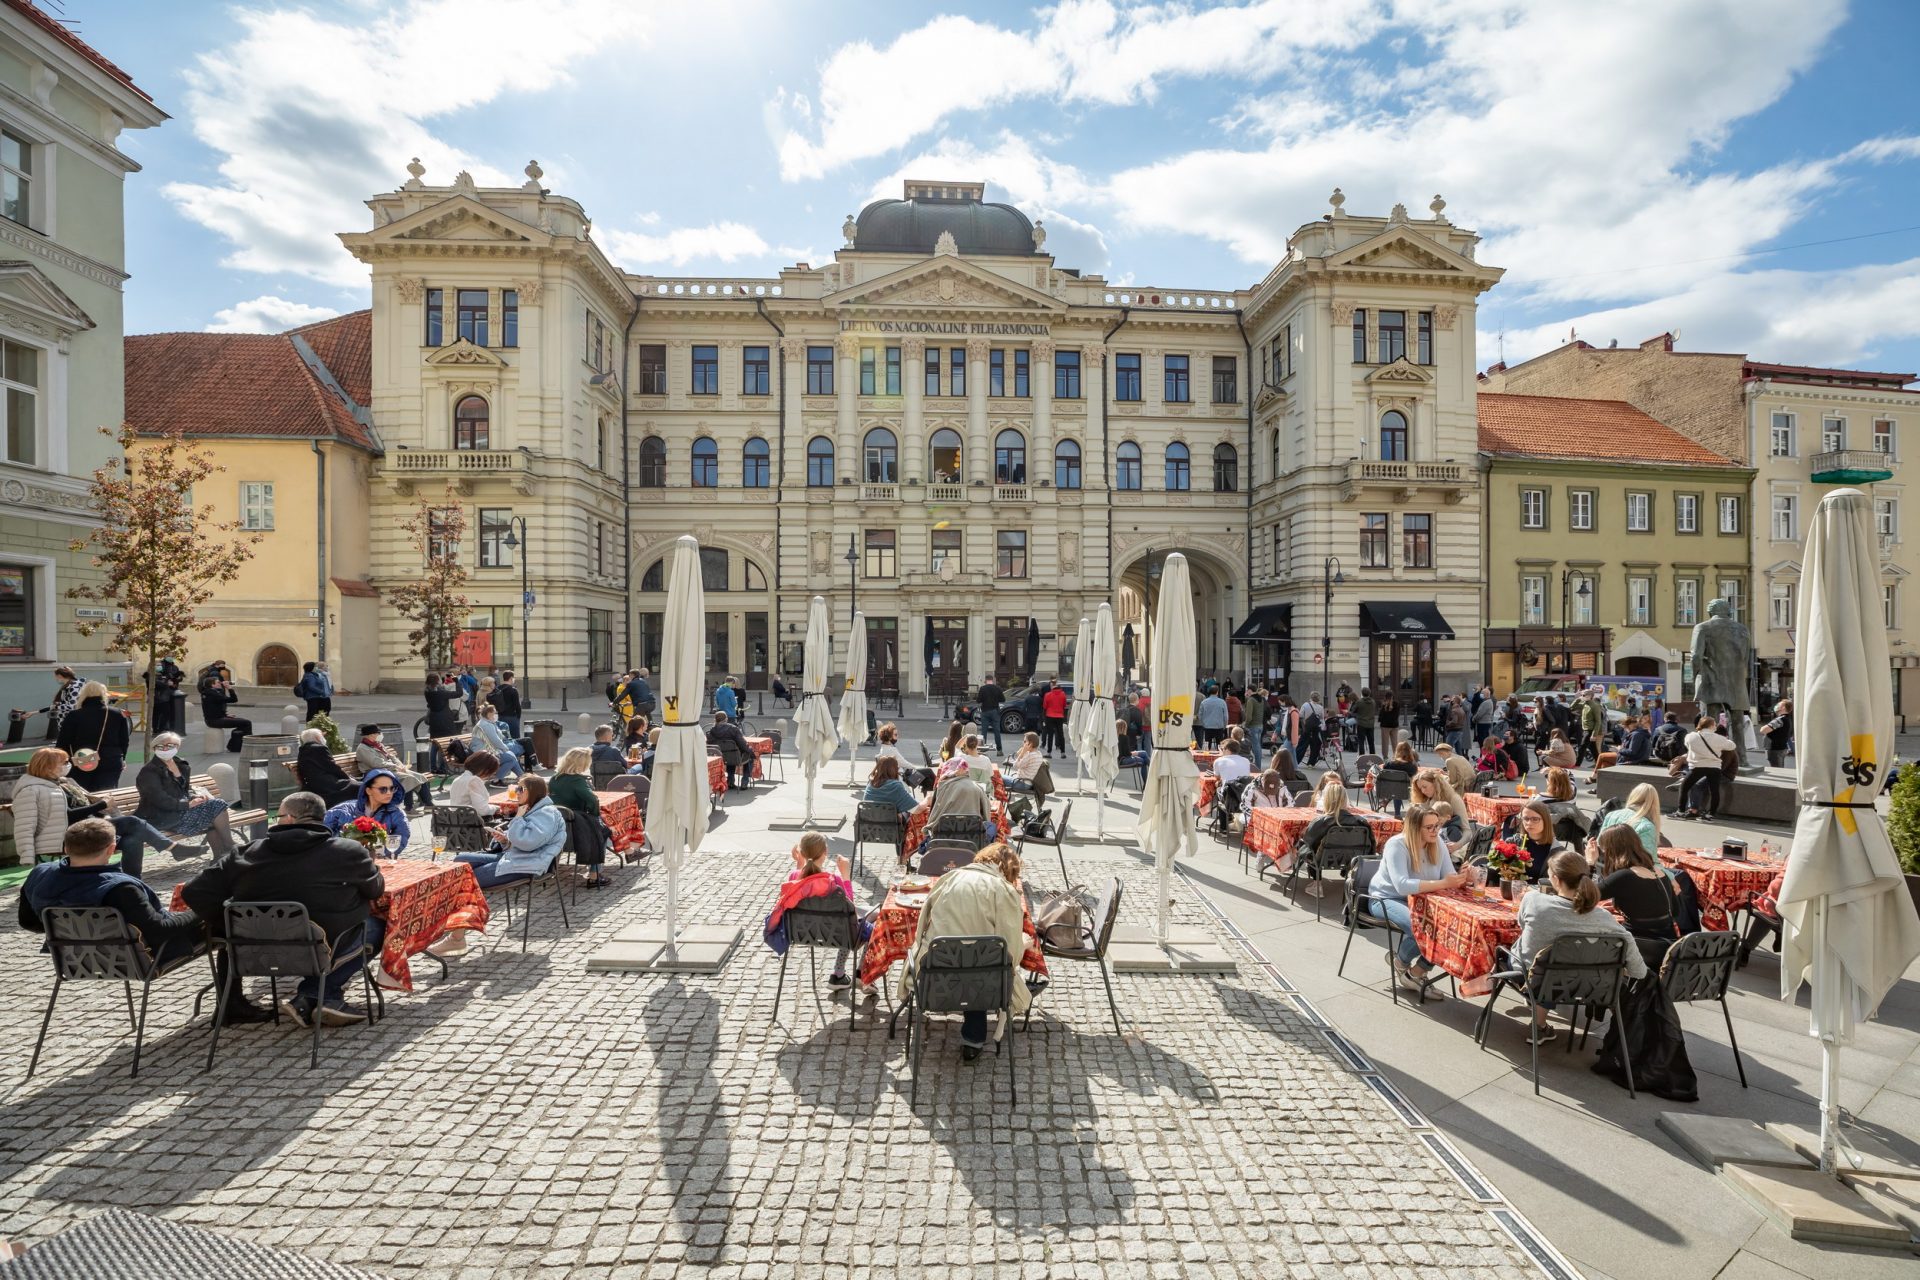 Ever Wondered What To Eat While Visiting Vilnius, Lithuania?